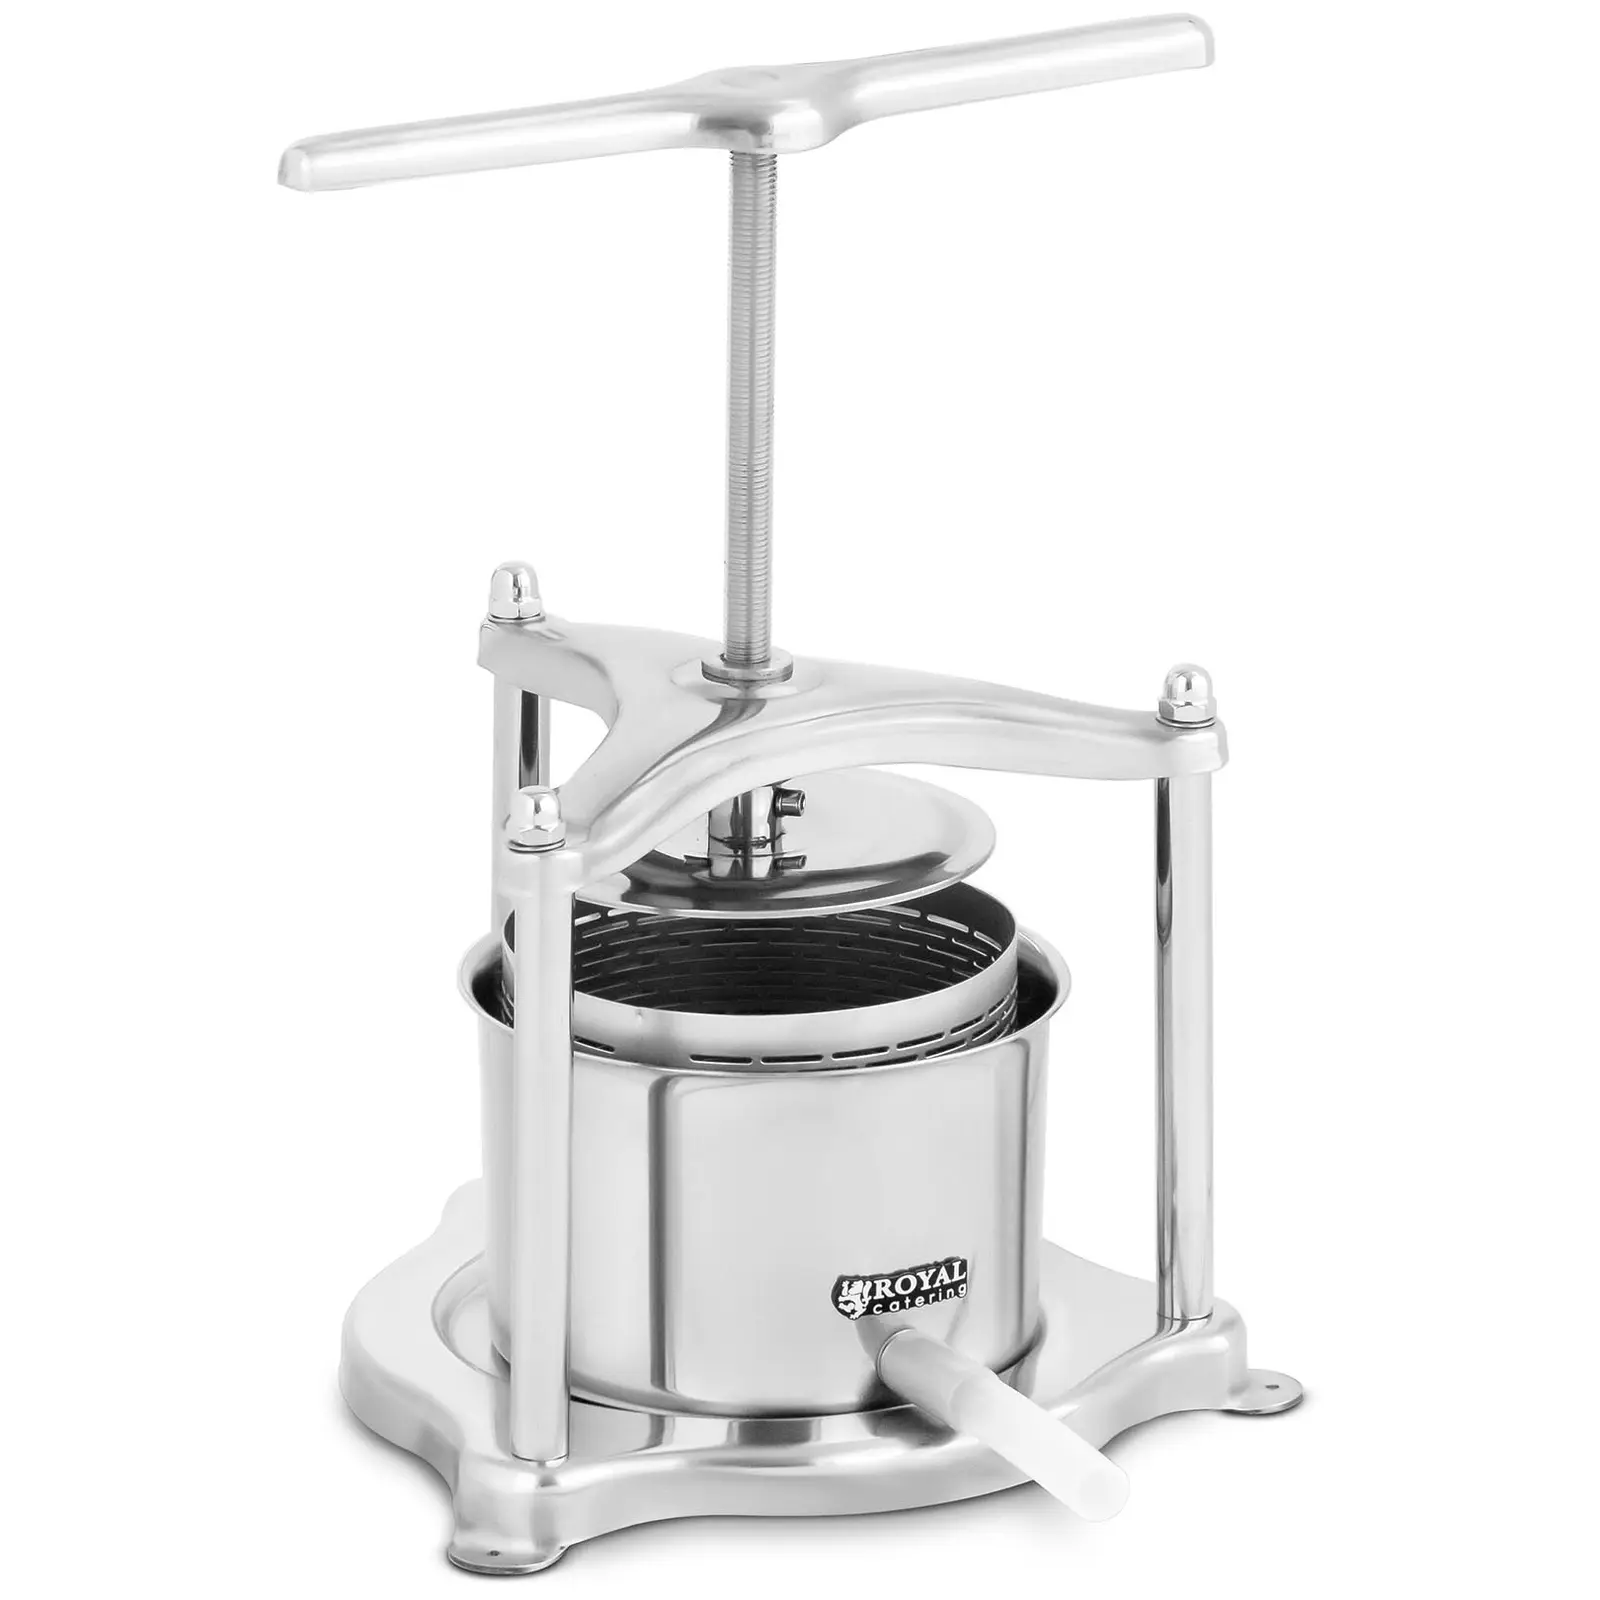 Juice Press - stainless steel - 3 l - incl. 5 muslin cloths - Royal Catering